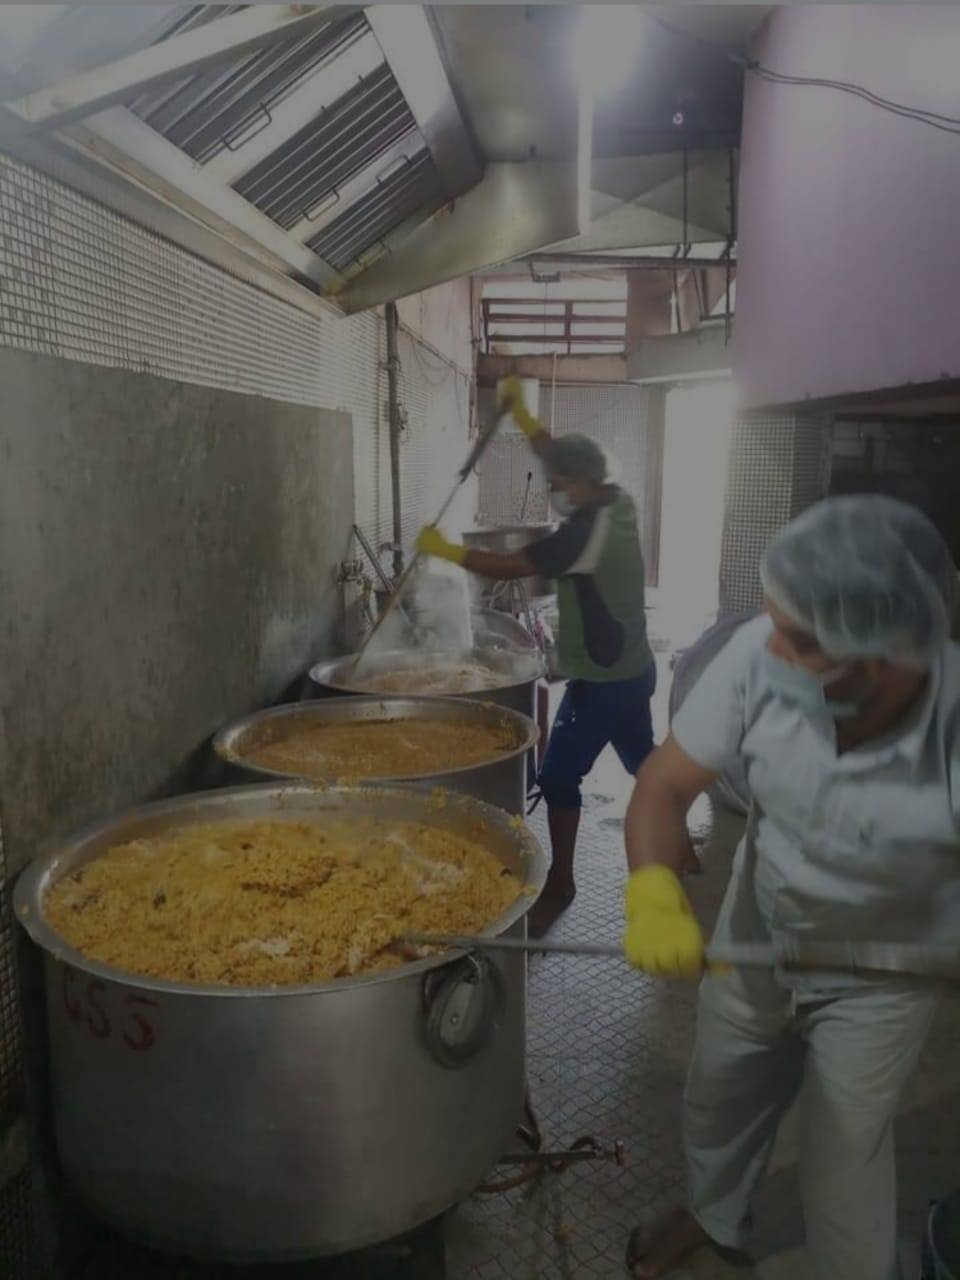 Food being prepared for distribution to needy people amid lockdown